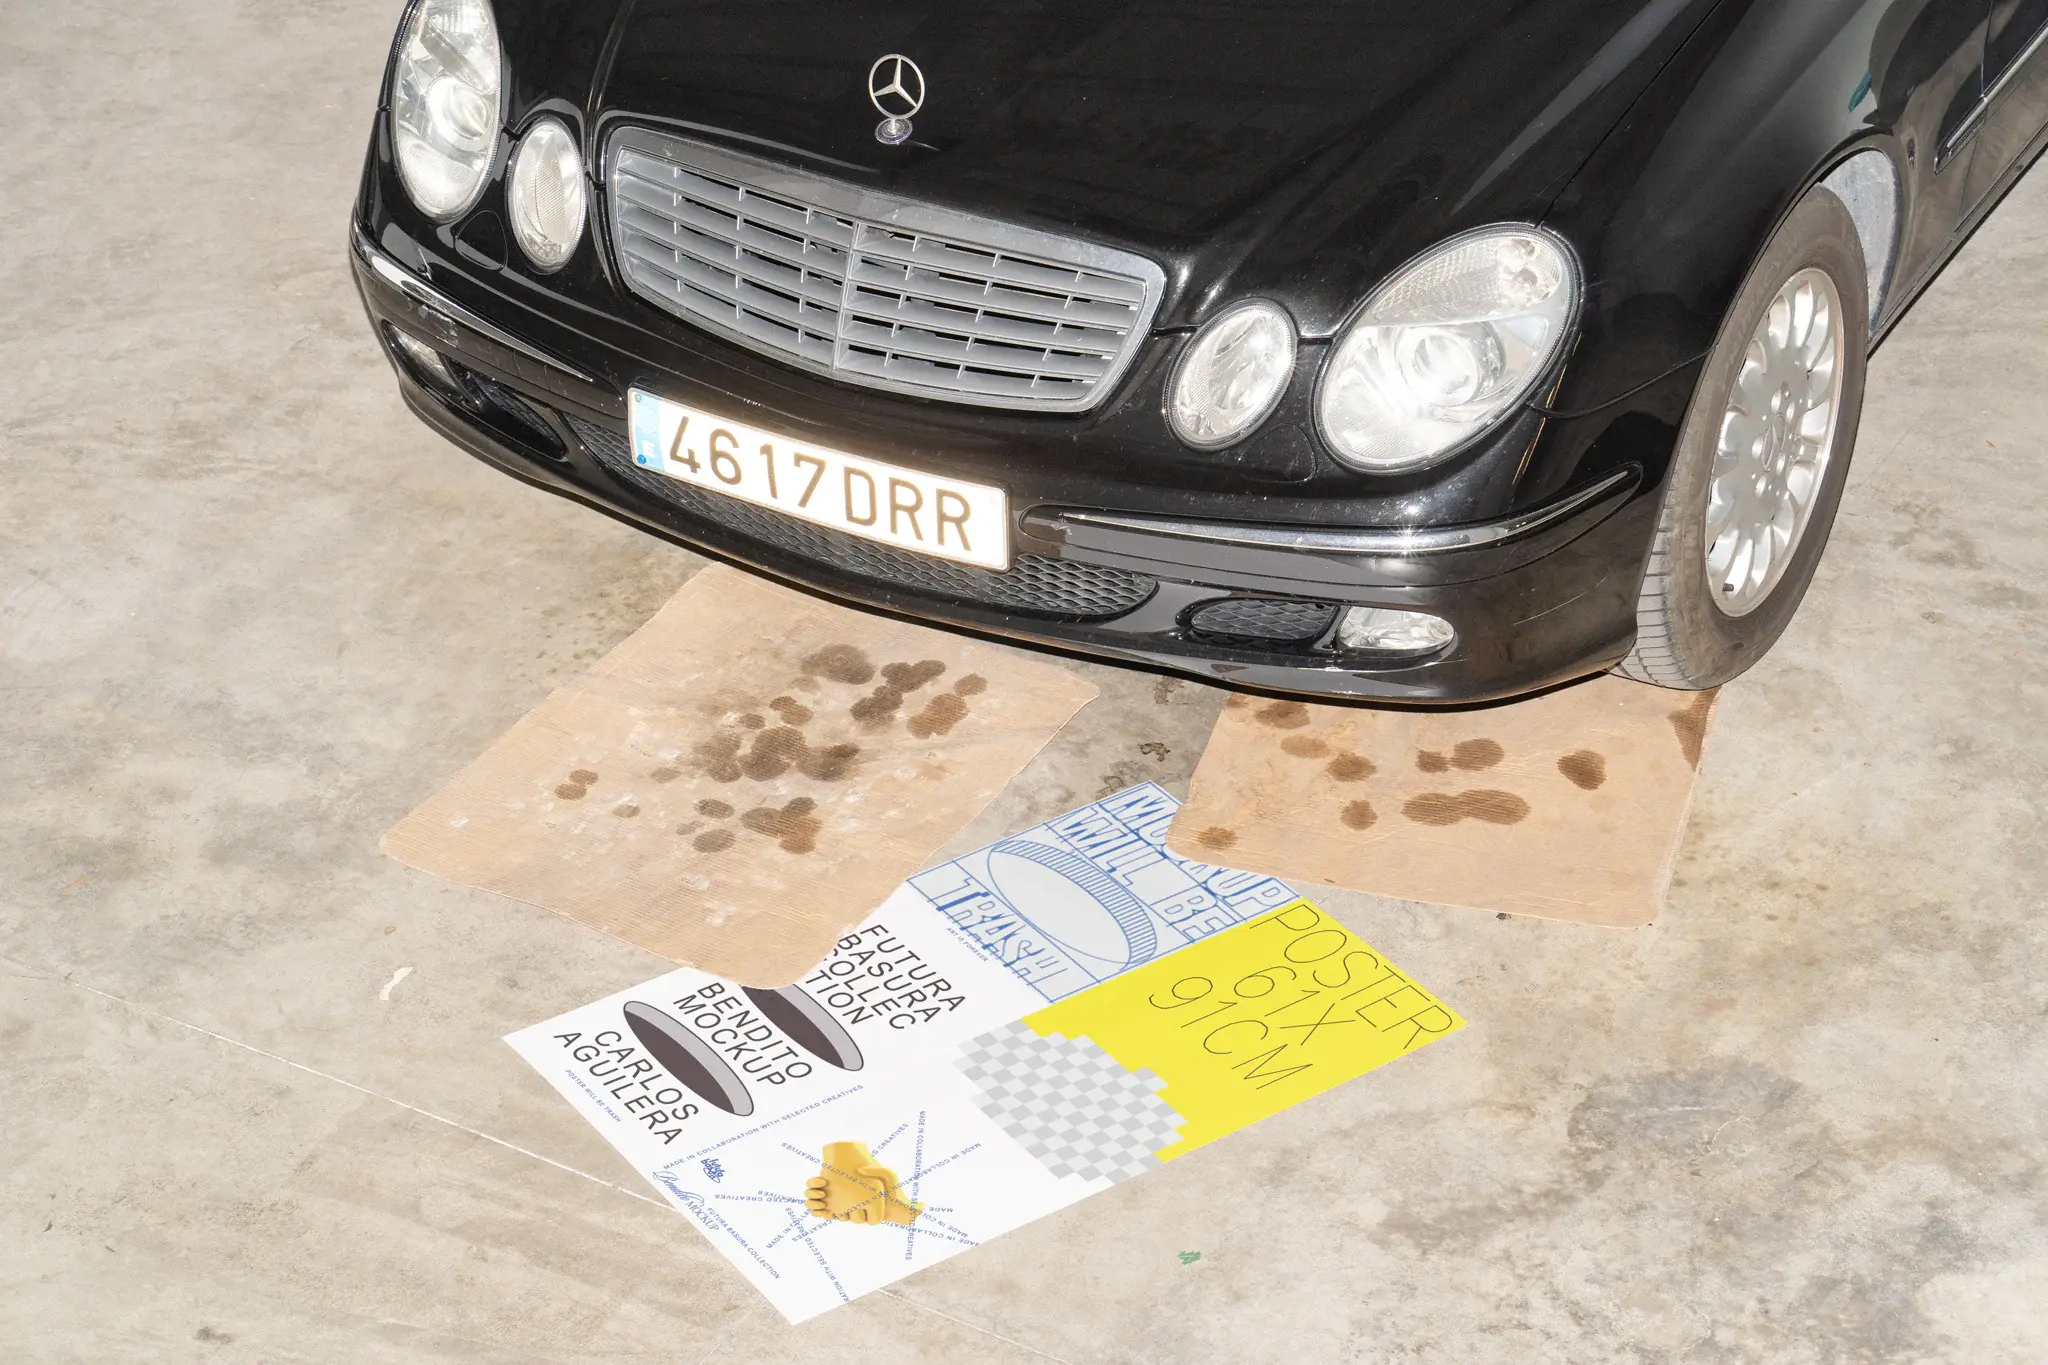 Poster mockup on the floor with 2 dirty cardboards on top in front of a luxury car